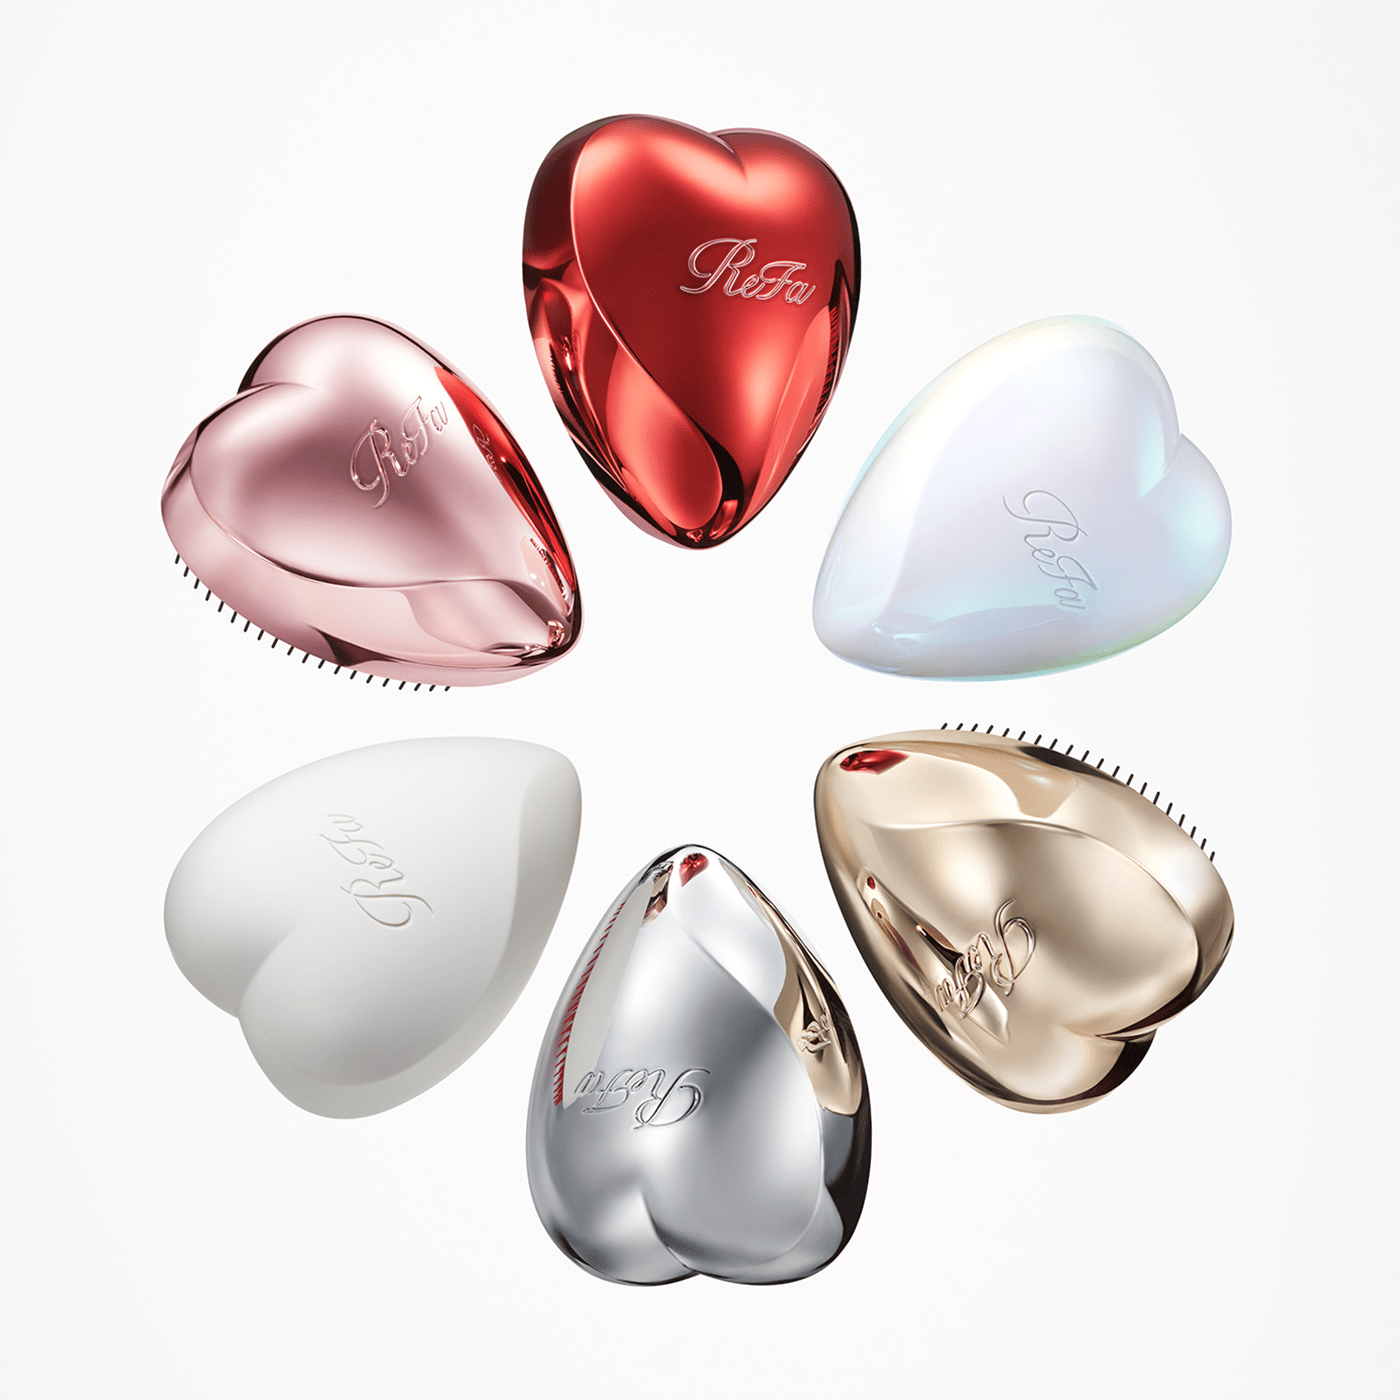 New ReFa HEART BRUSH colors to choose from! And as a special campaign to mark their launch, you'll even get the chance to a win a brush in a limited-edition color!